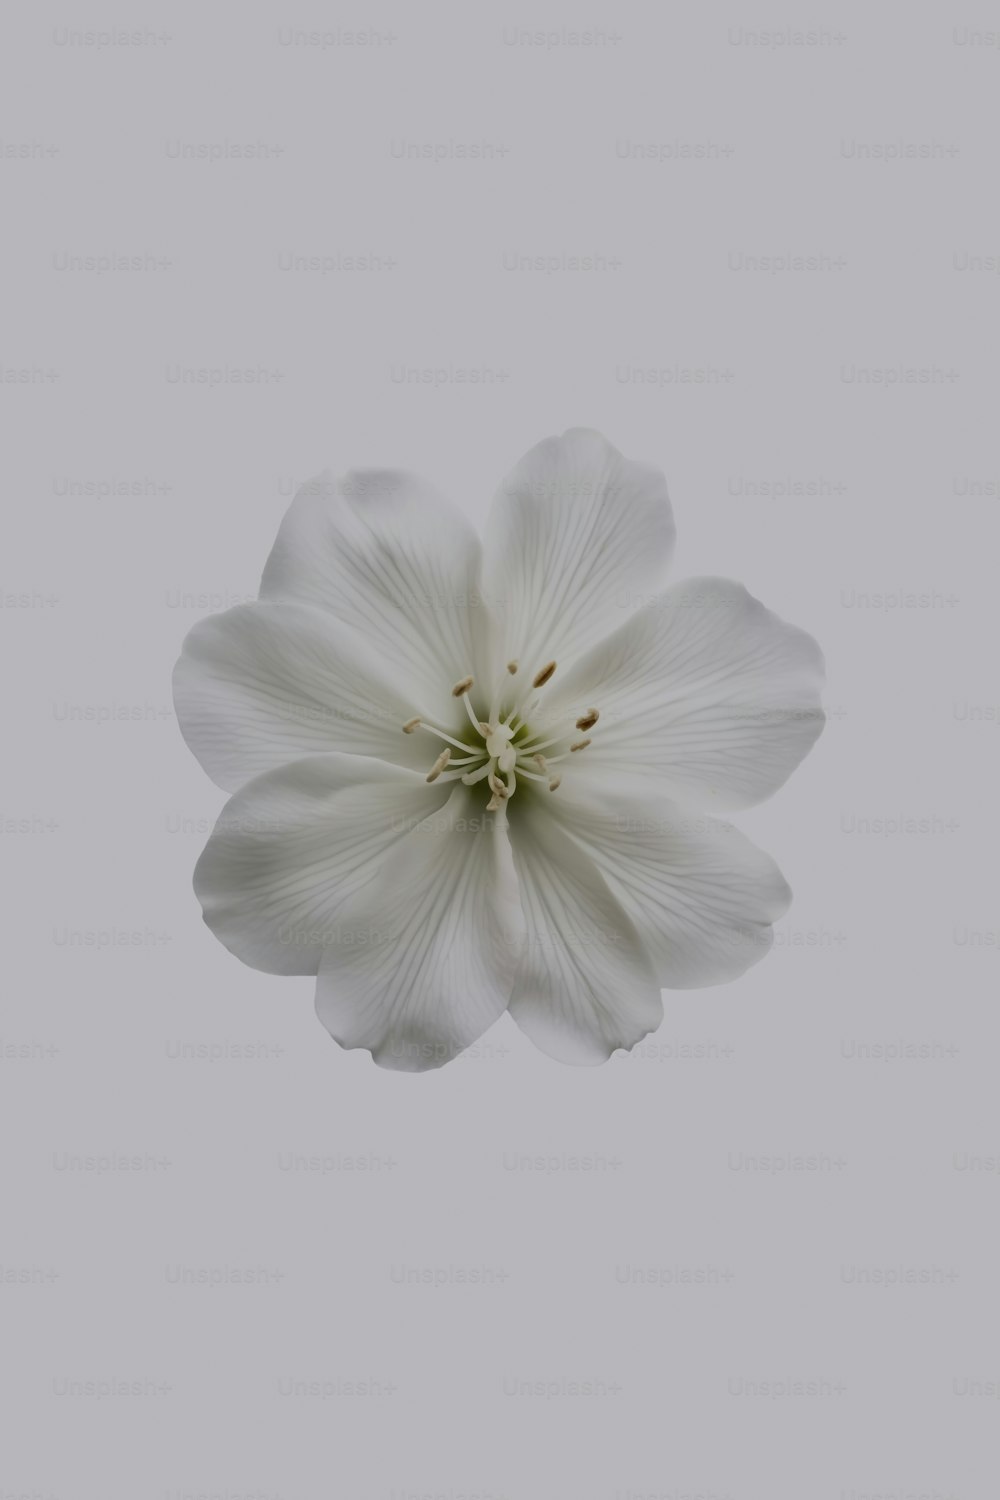 a white flower is in the middle of a gray sky